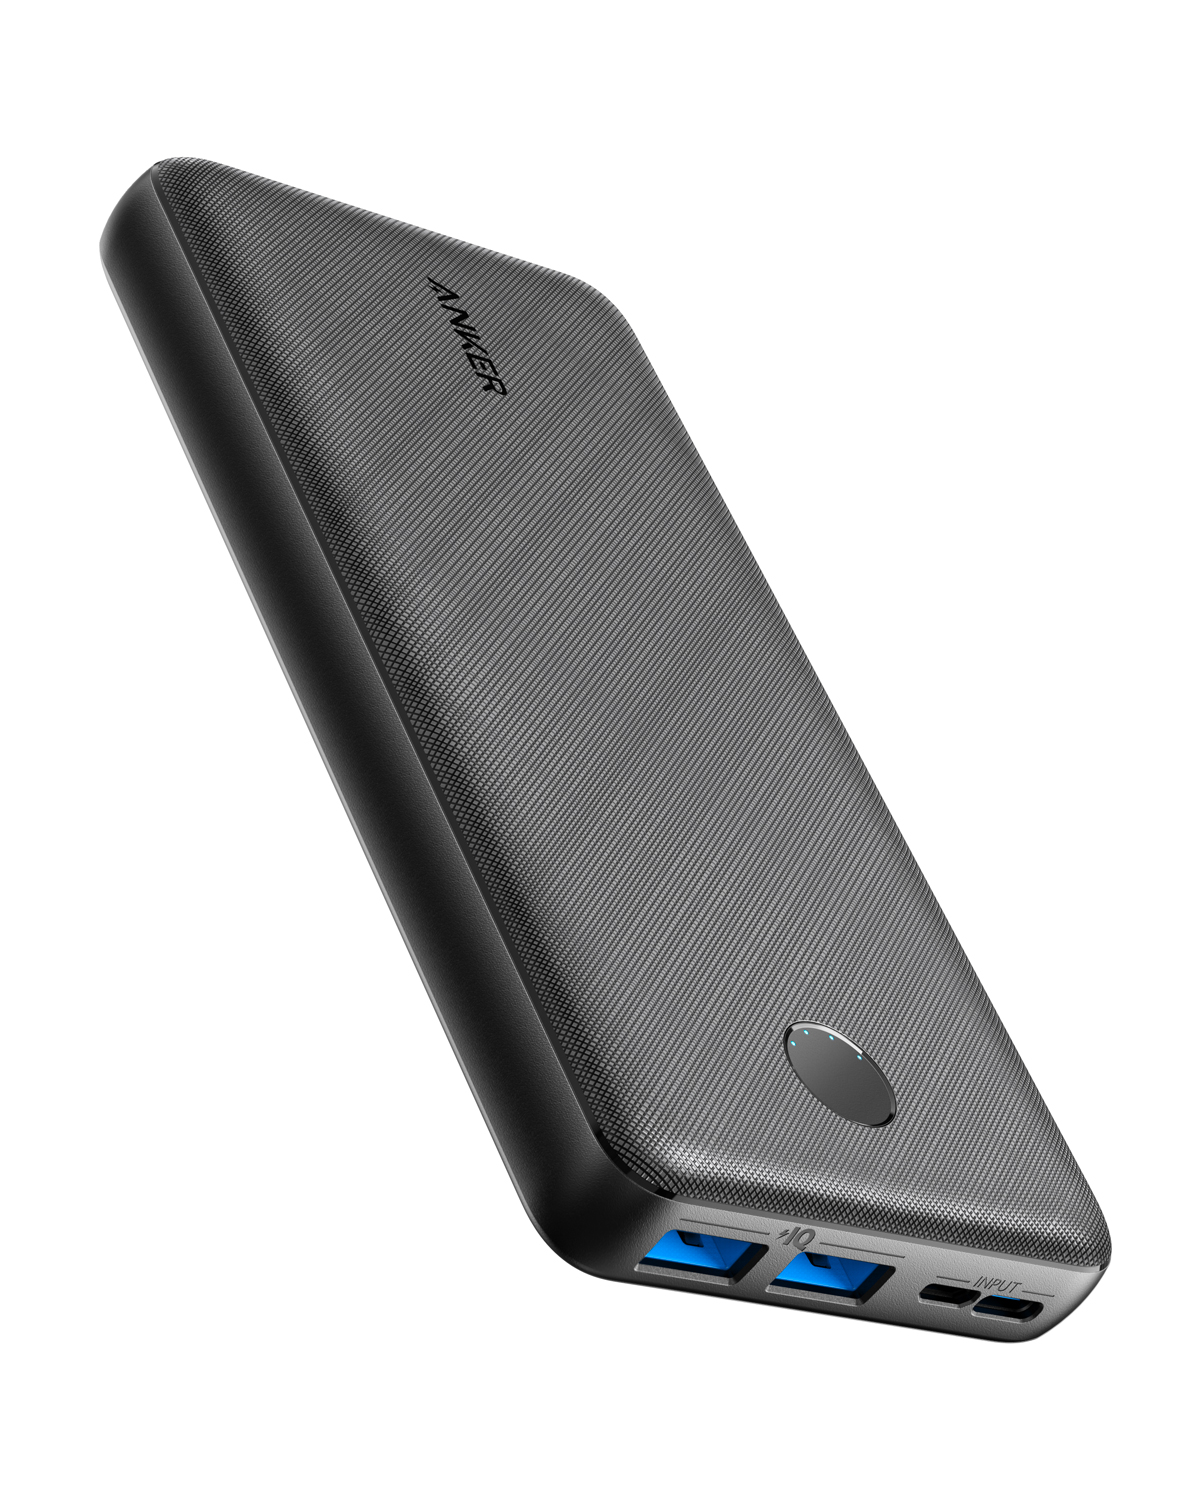 Anker Portable Charger 20000mAh Power Bank 2-Port Battery Pack ...